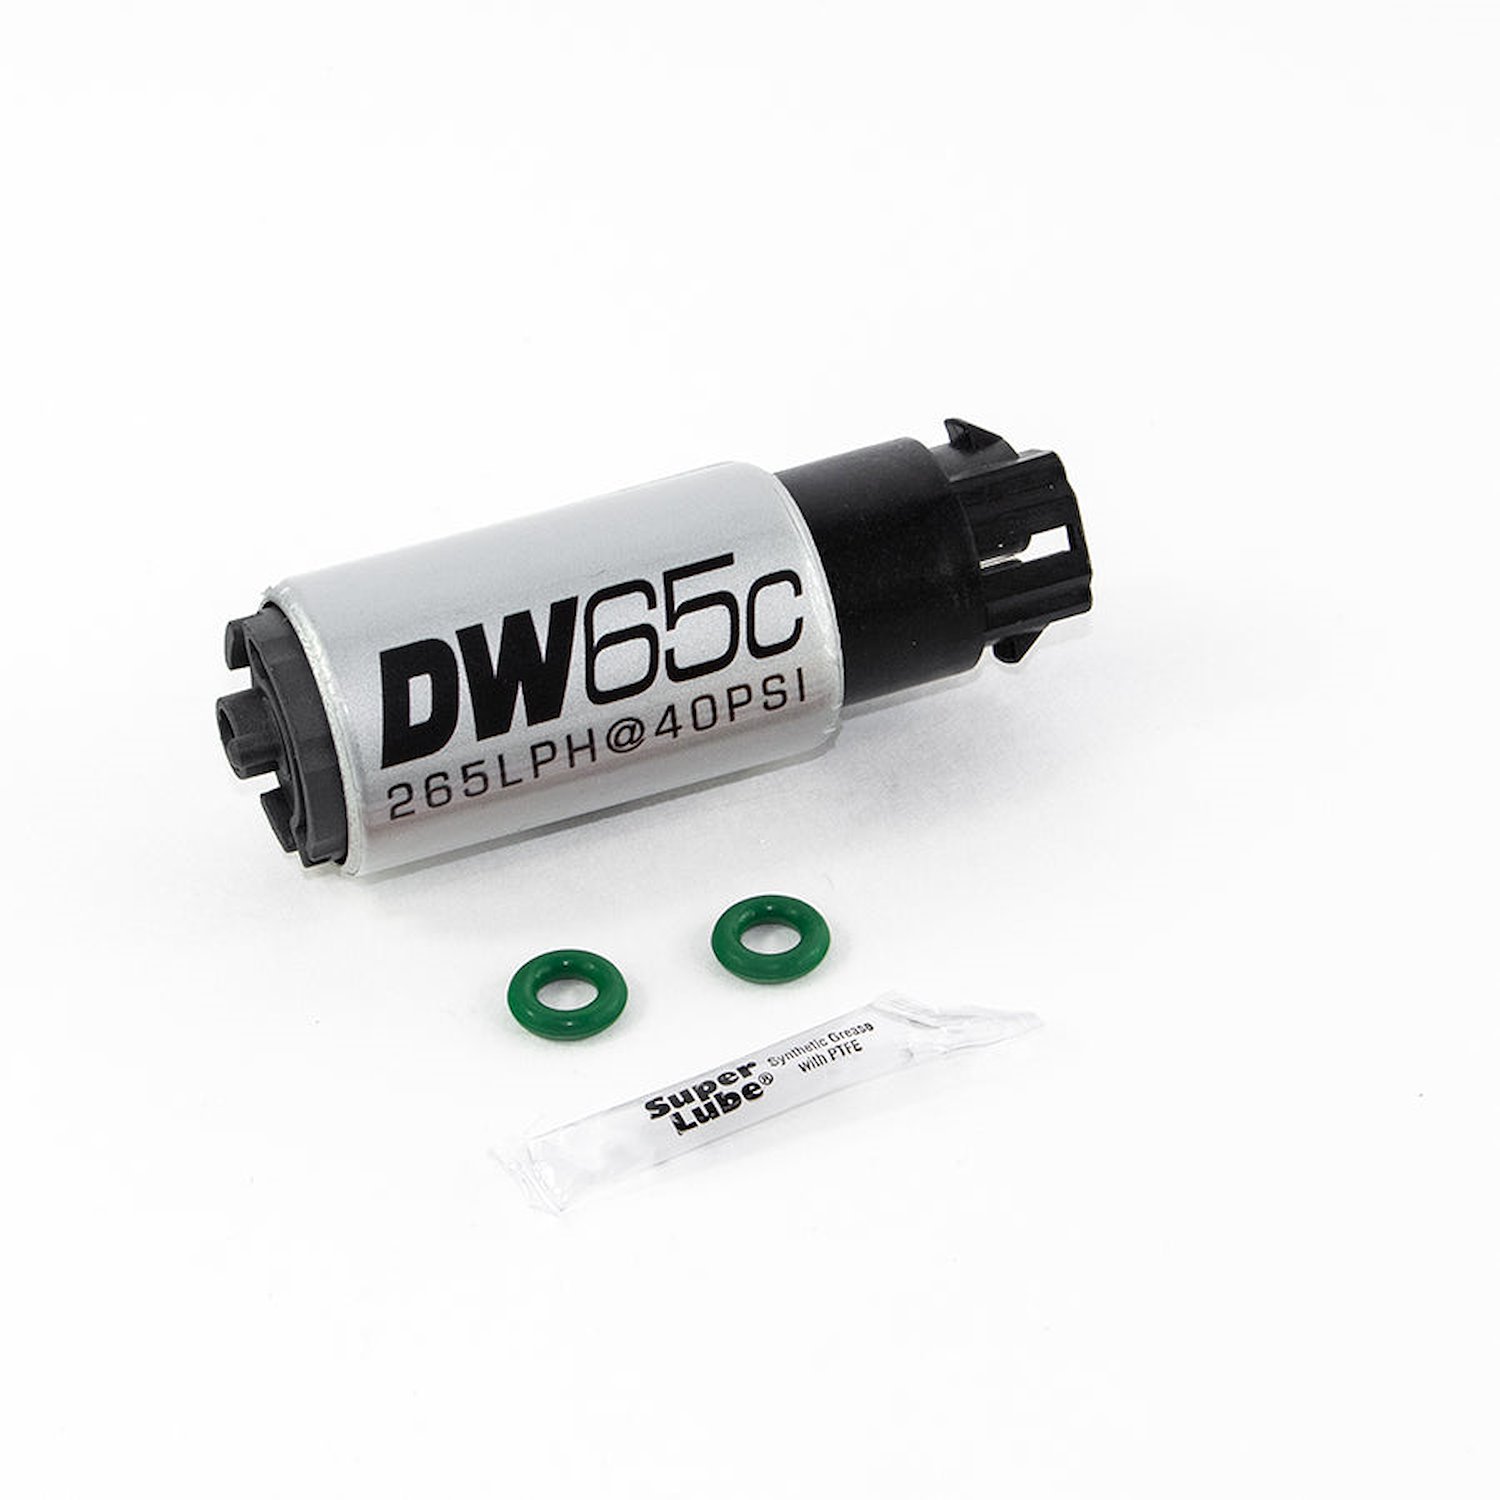 96521009 DW65C series 265lph compact fuel pump w/ mounting clips w /Install Kit for R35 GTR 2009-2015